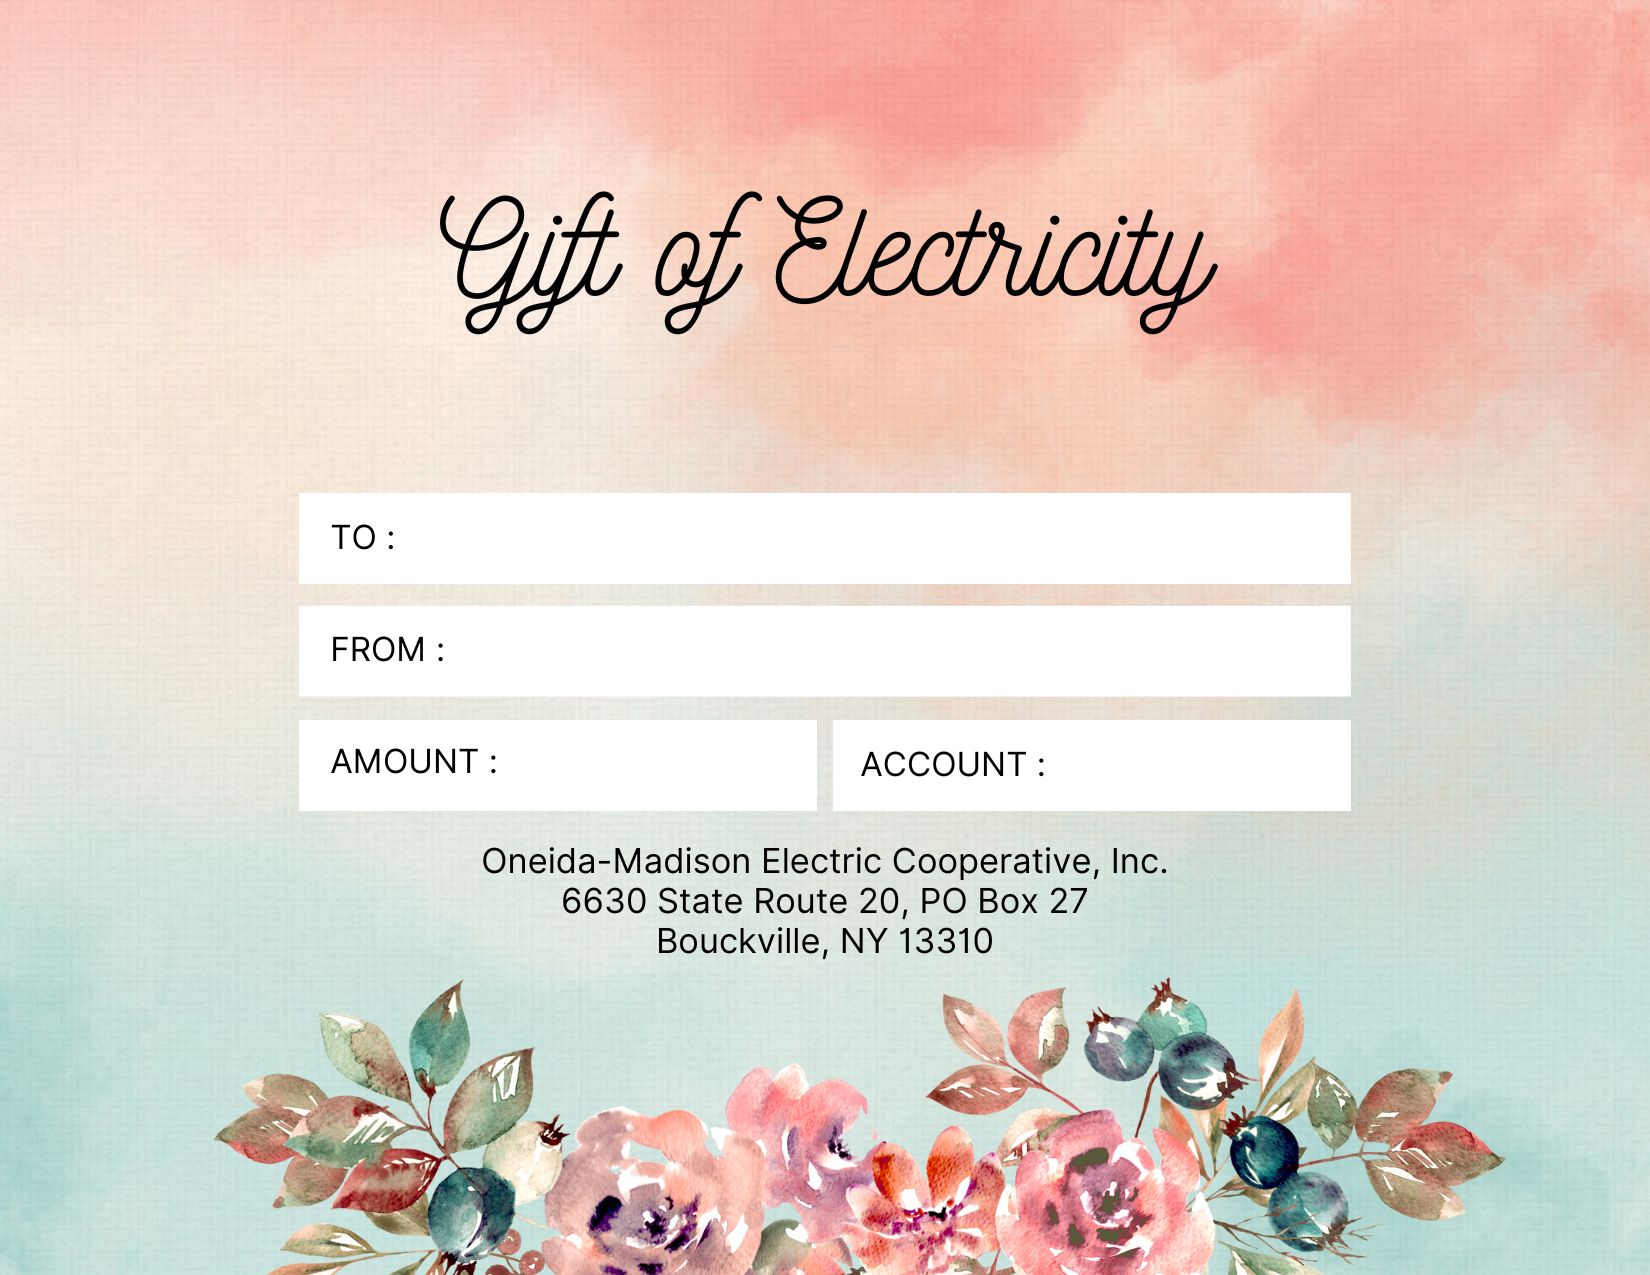 Gift of Electricity